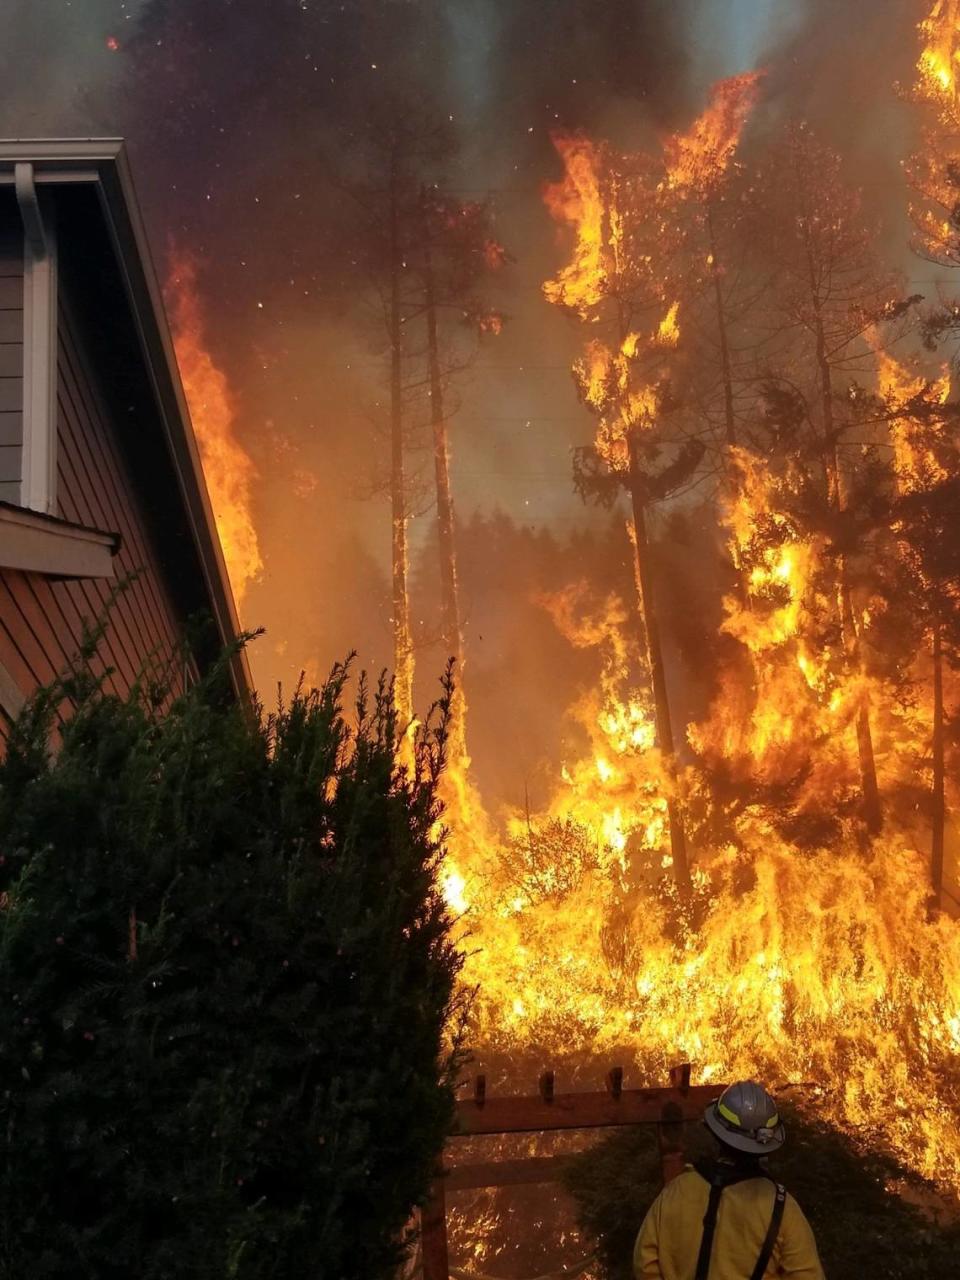 A firefighter stands in front of the Sumner Grade Fire blaze in September 2020.